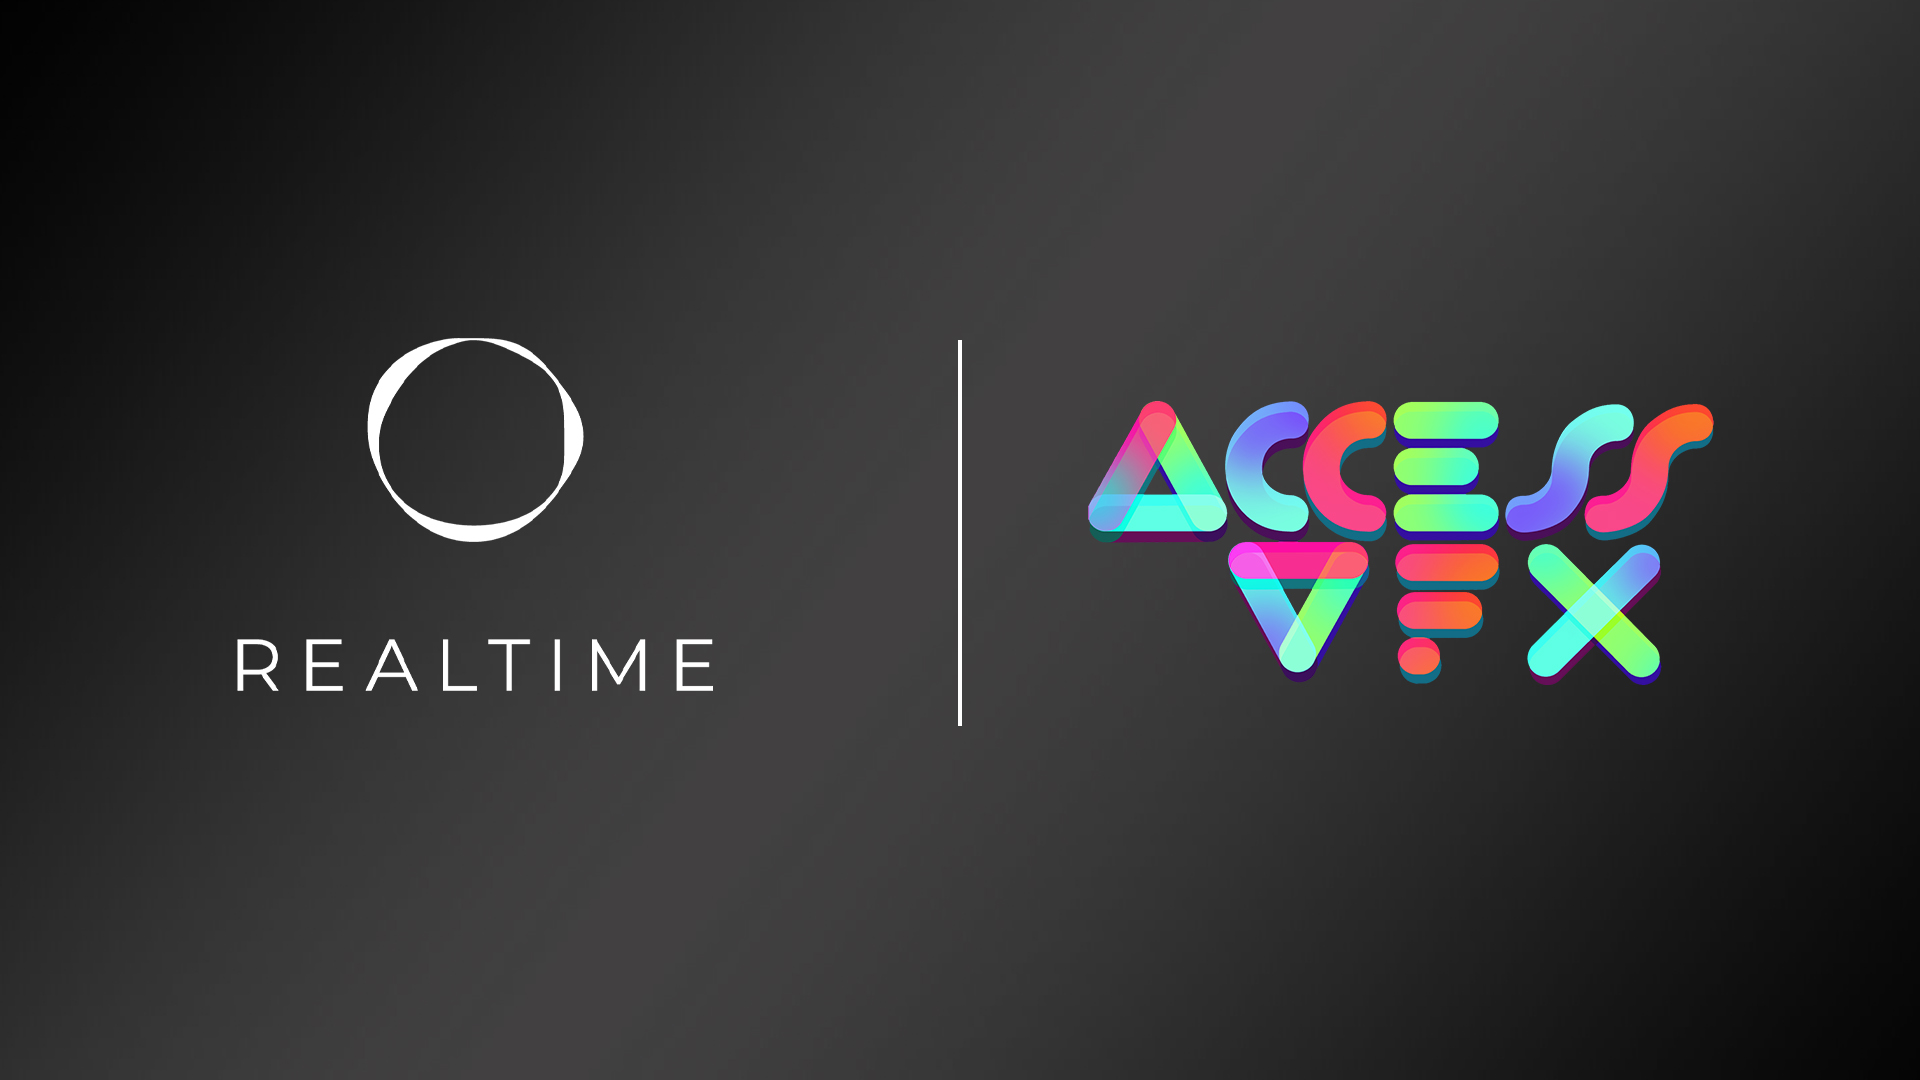 REALTIME Partner with Access VFX